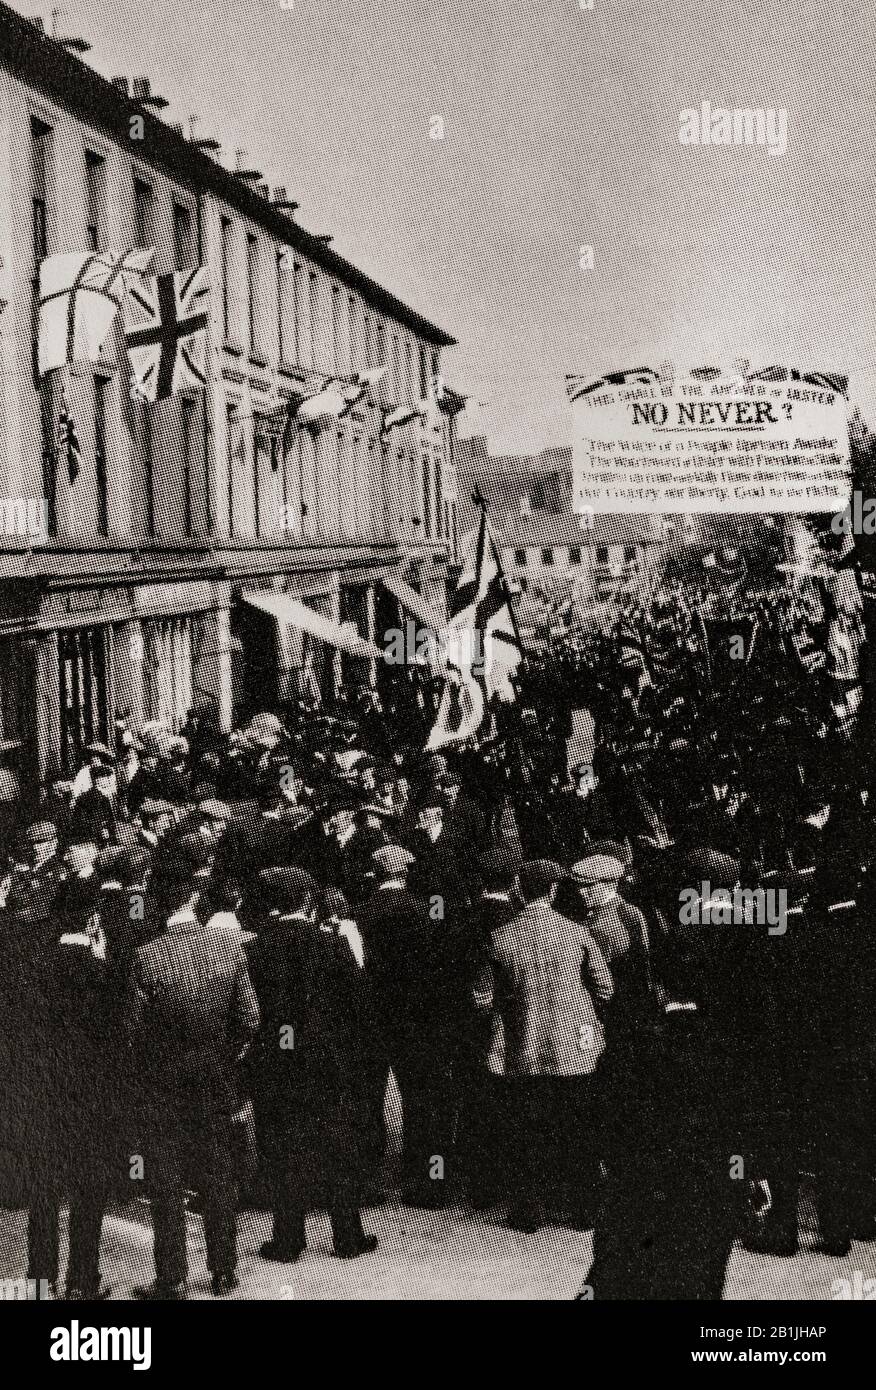 In April 1912, 250,000 Orangemen converged on Balmoral Showground in Belfast, declaring that under no circumstances will they accept Home Rule in Ireland. Organised by the Loyal Orange Institution, aka the Orange Order, a Protestant fraternal order mostly in Northern Ireland, it was founded in County Armagh in 1795, during a period of Protestant–Catholic sectarian conflict, as a Masonic-style fraternity sworn to maintain the Protestant Ascendancy. Stock Photo